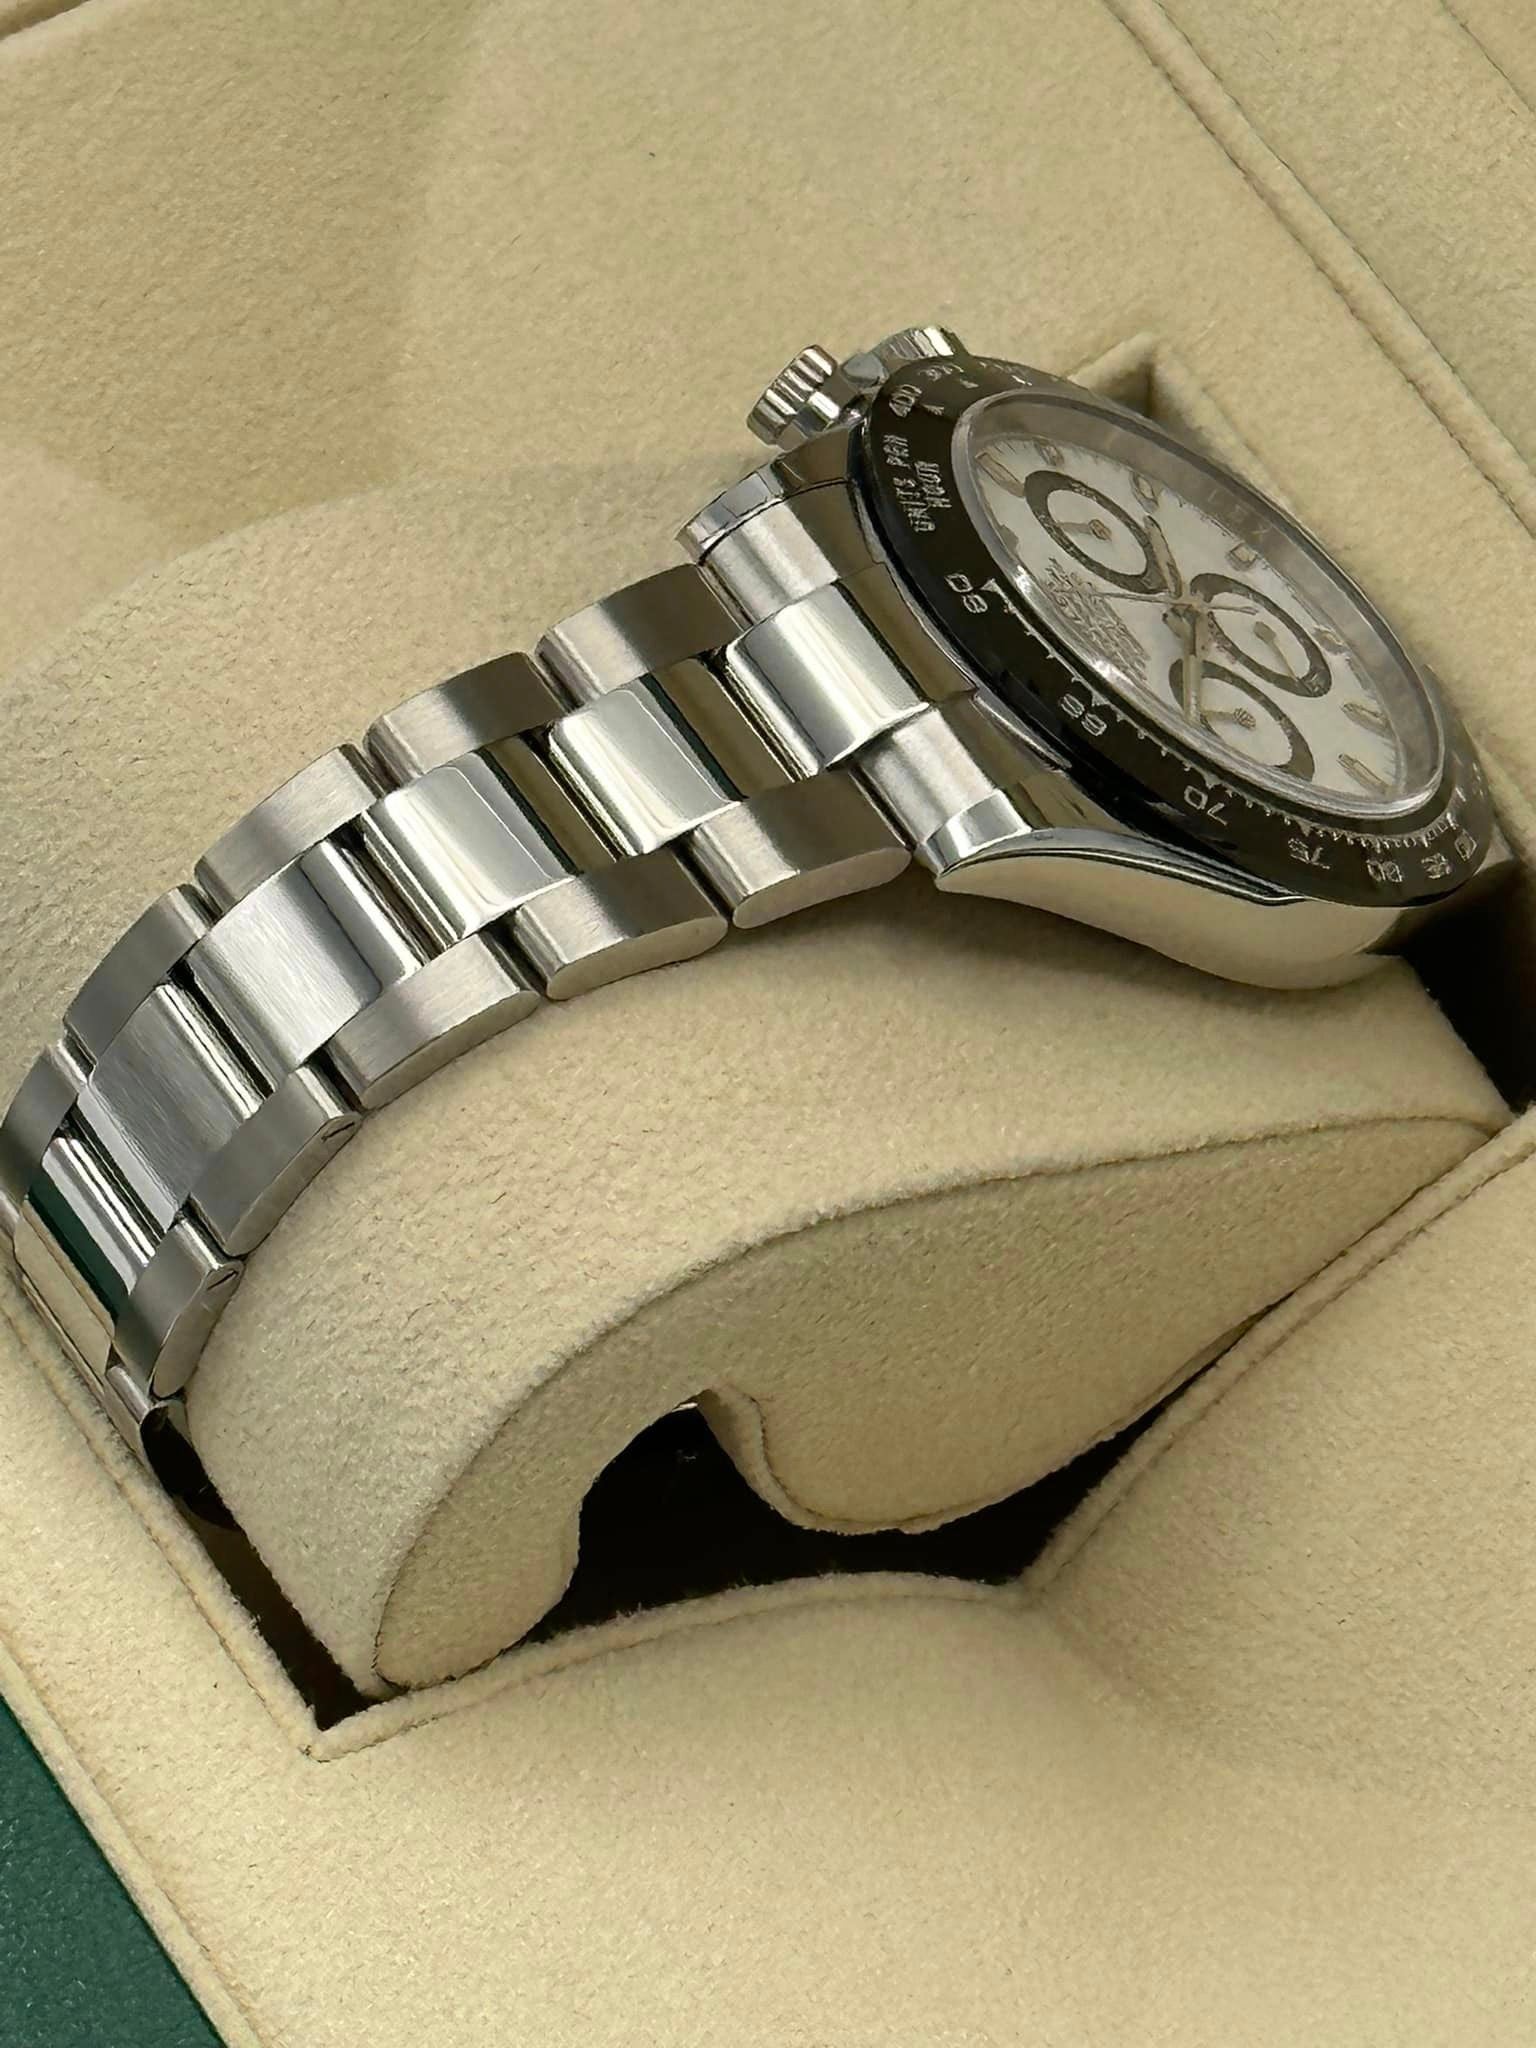 NEW 2023 Rolex Daytona 116500LN Stainless Steel White Panda Dial - MyWatchLLC